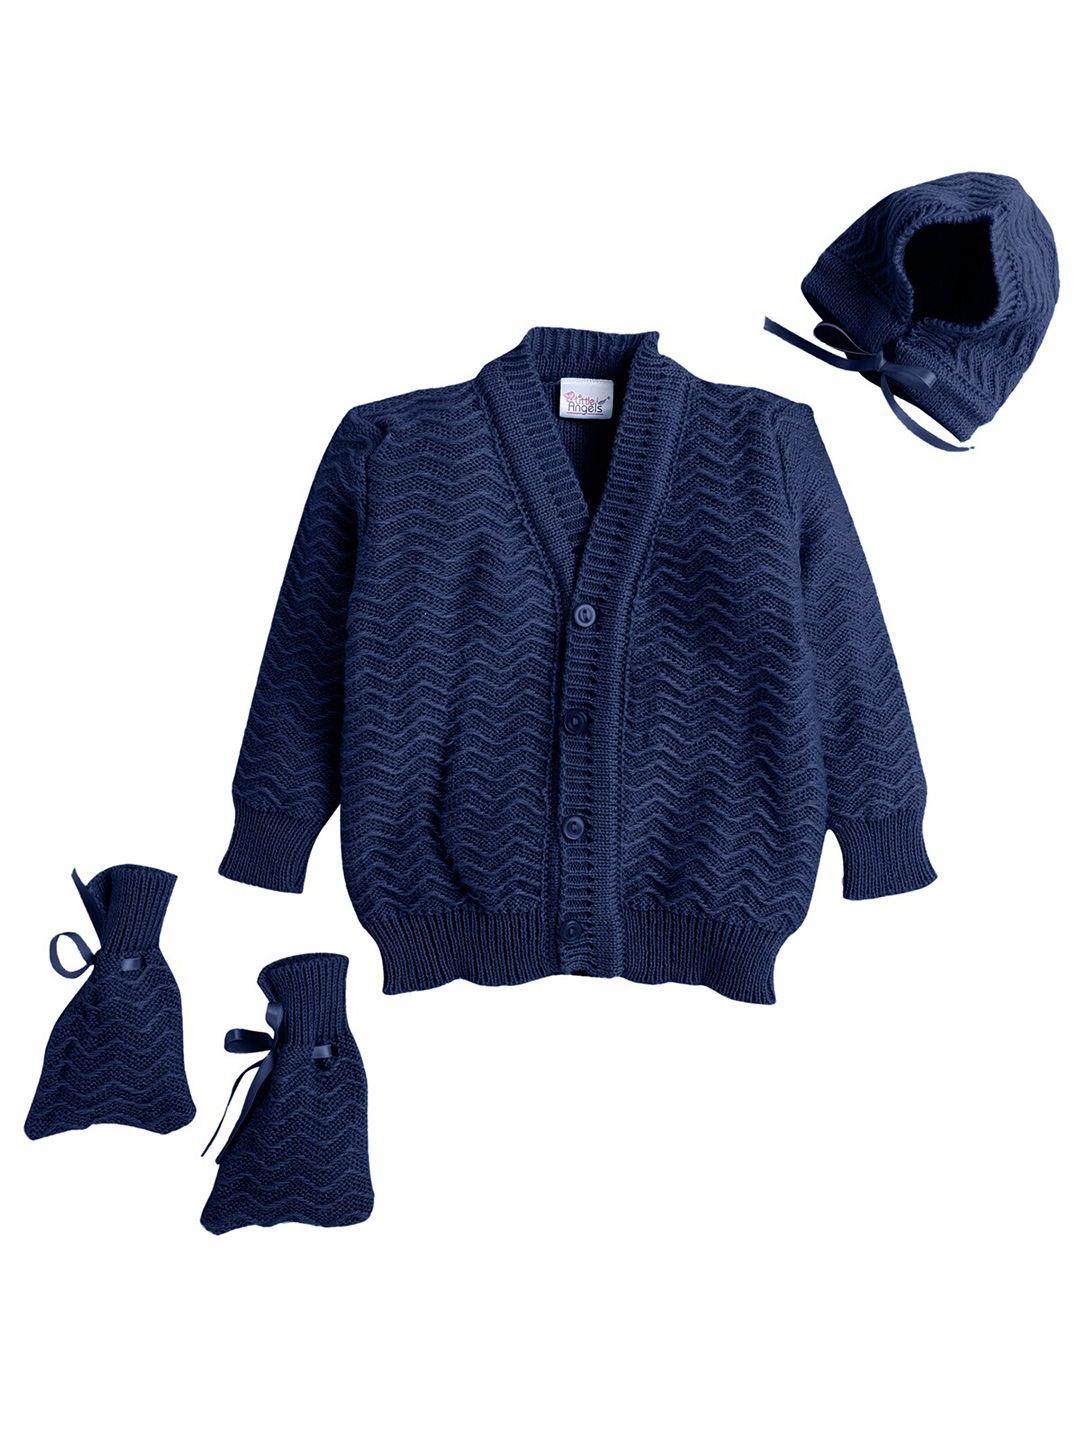 little angels kids navy blue acrylic ribbed cardigan set with cap and socks